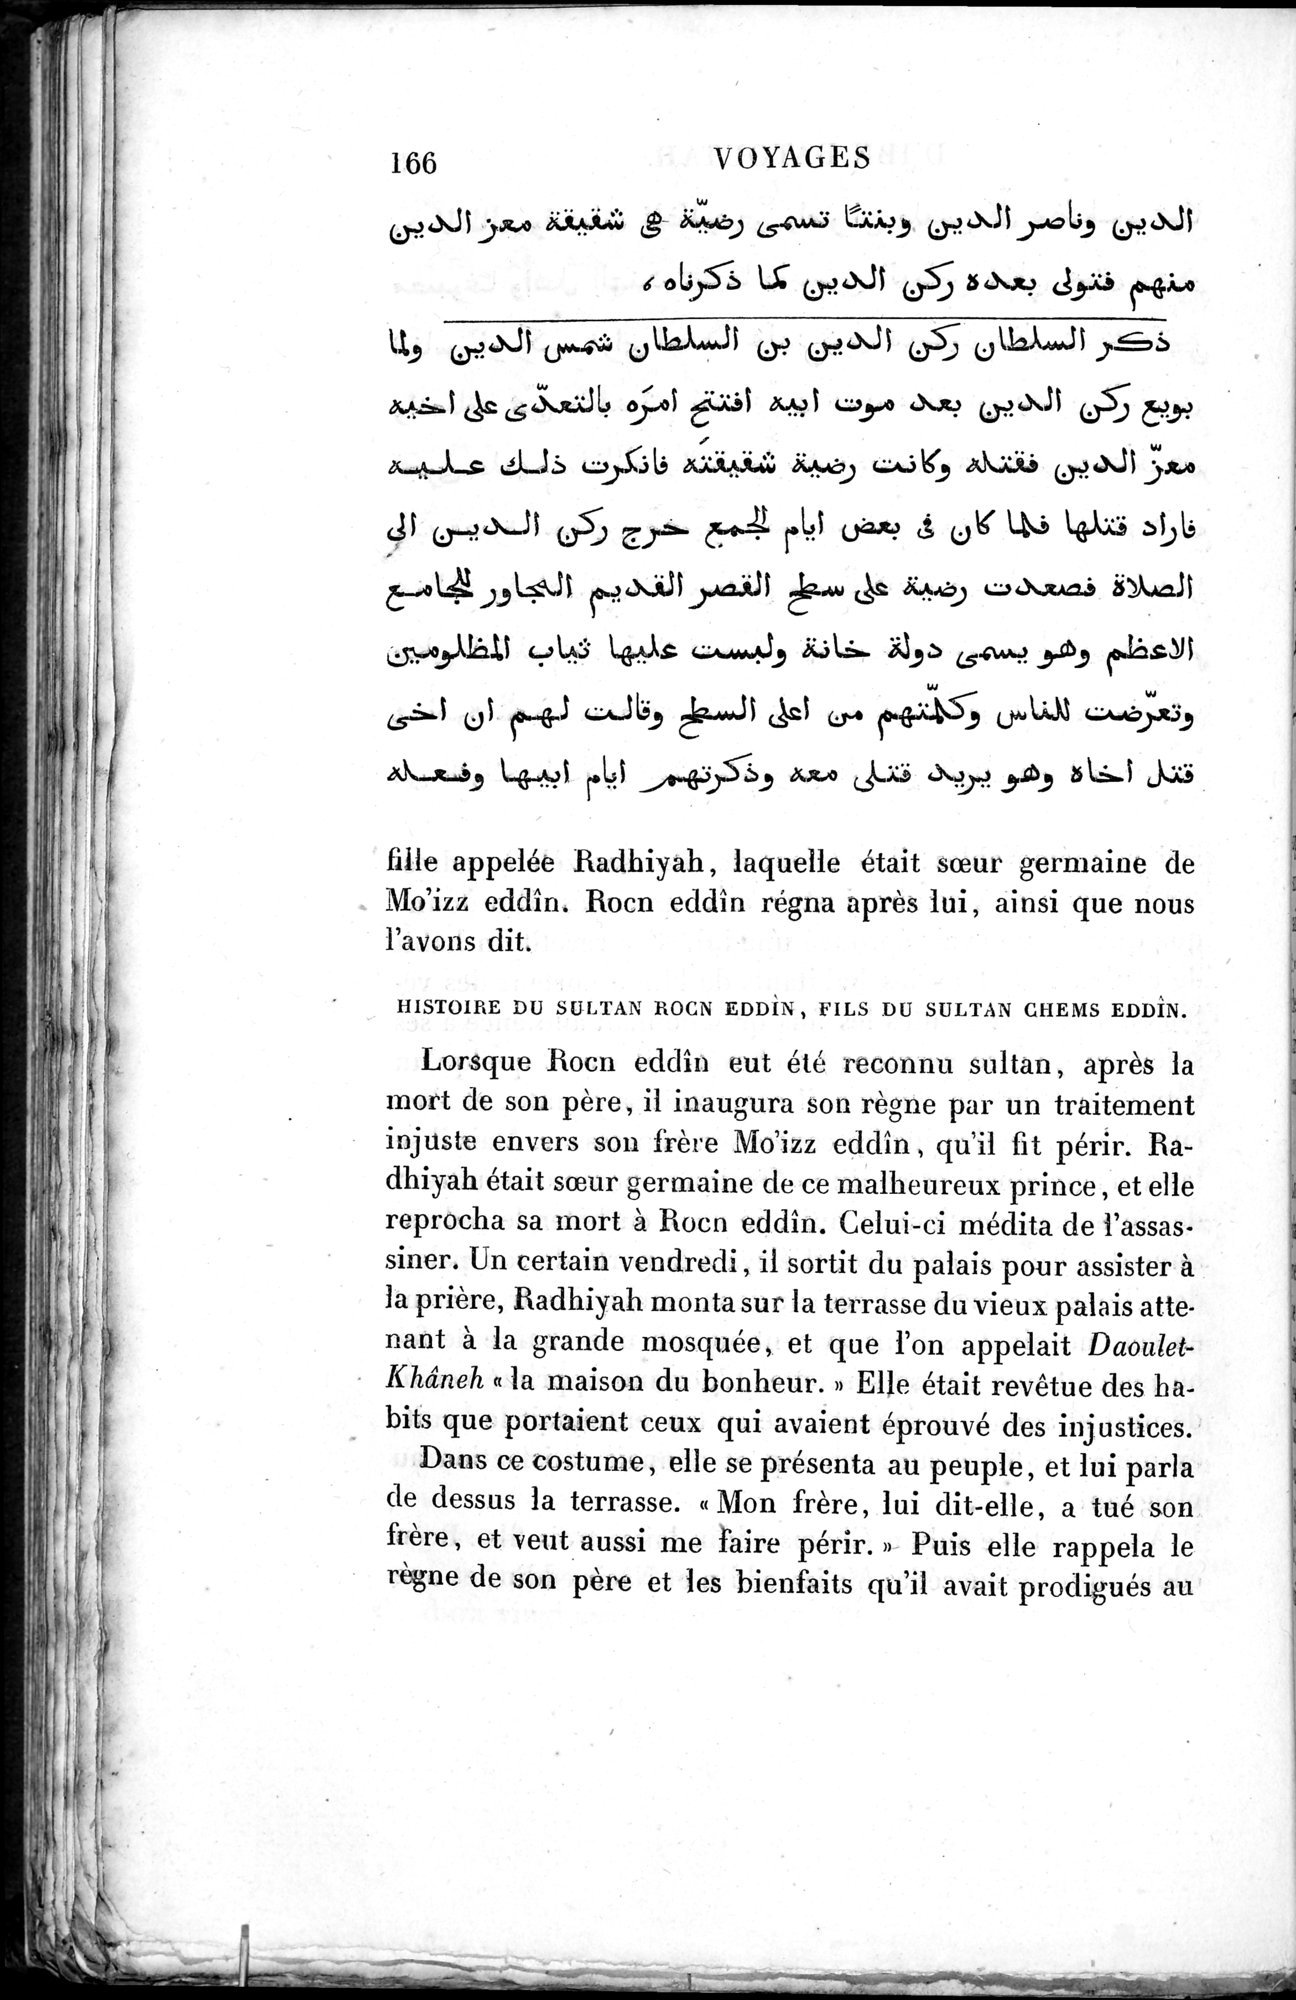 Voyages d'Ibn Batoutah : vol.3 / Page 206 (Grayscale High Resolution Image)